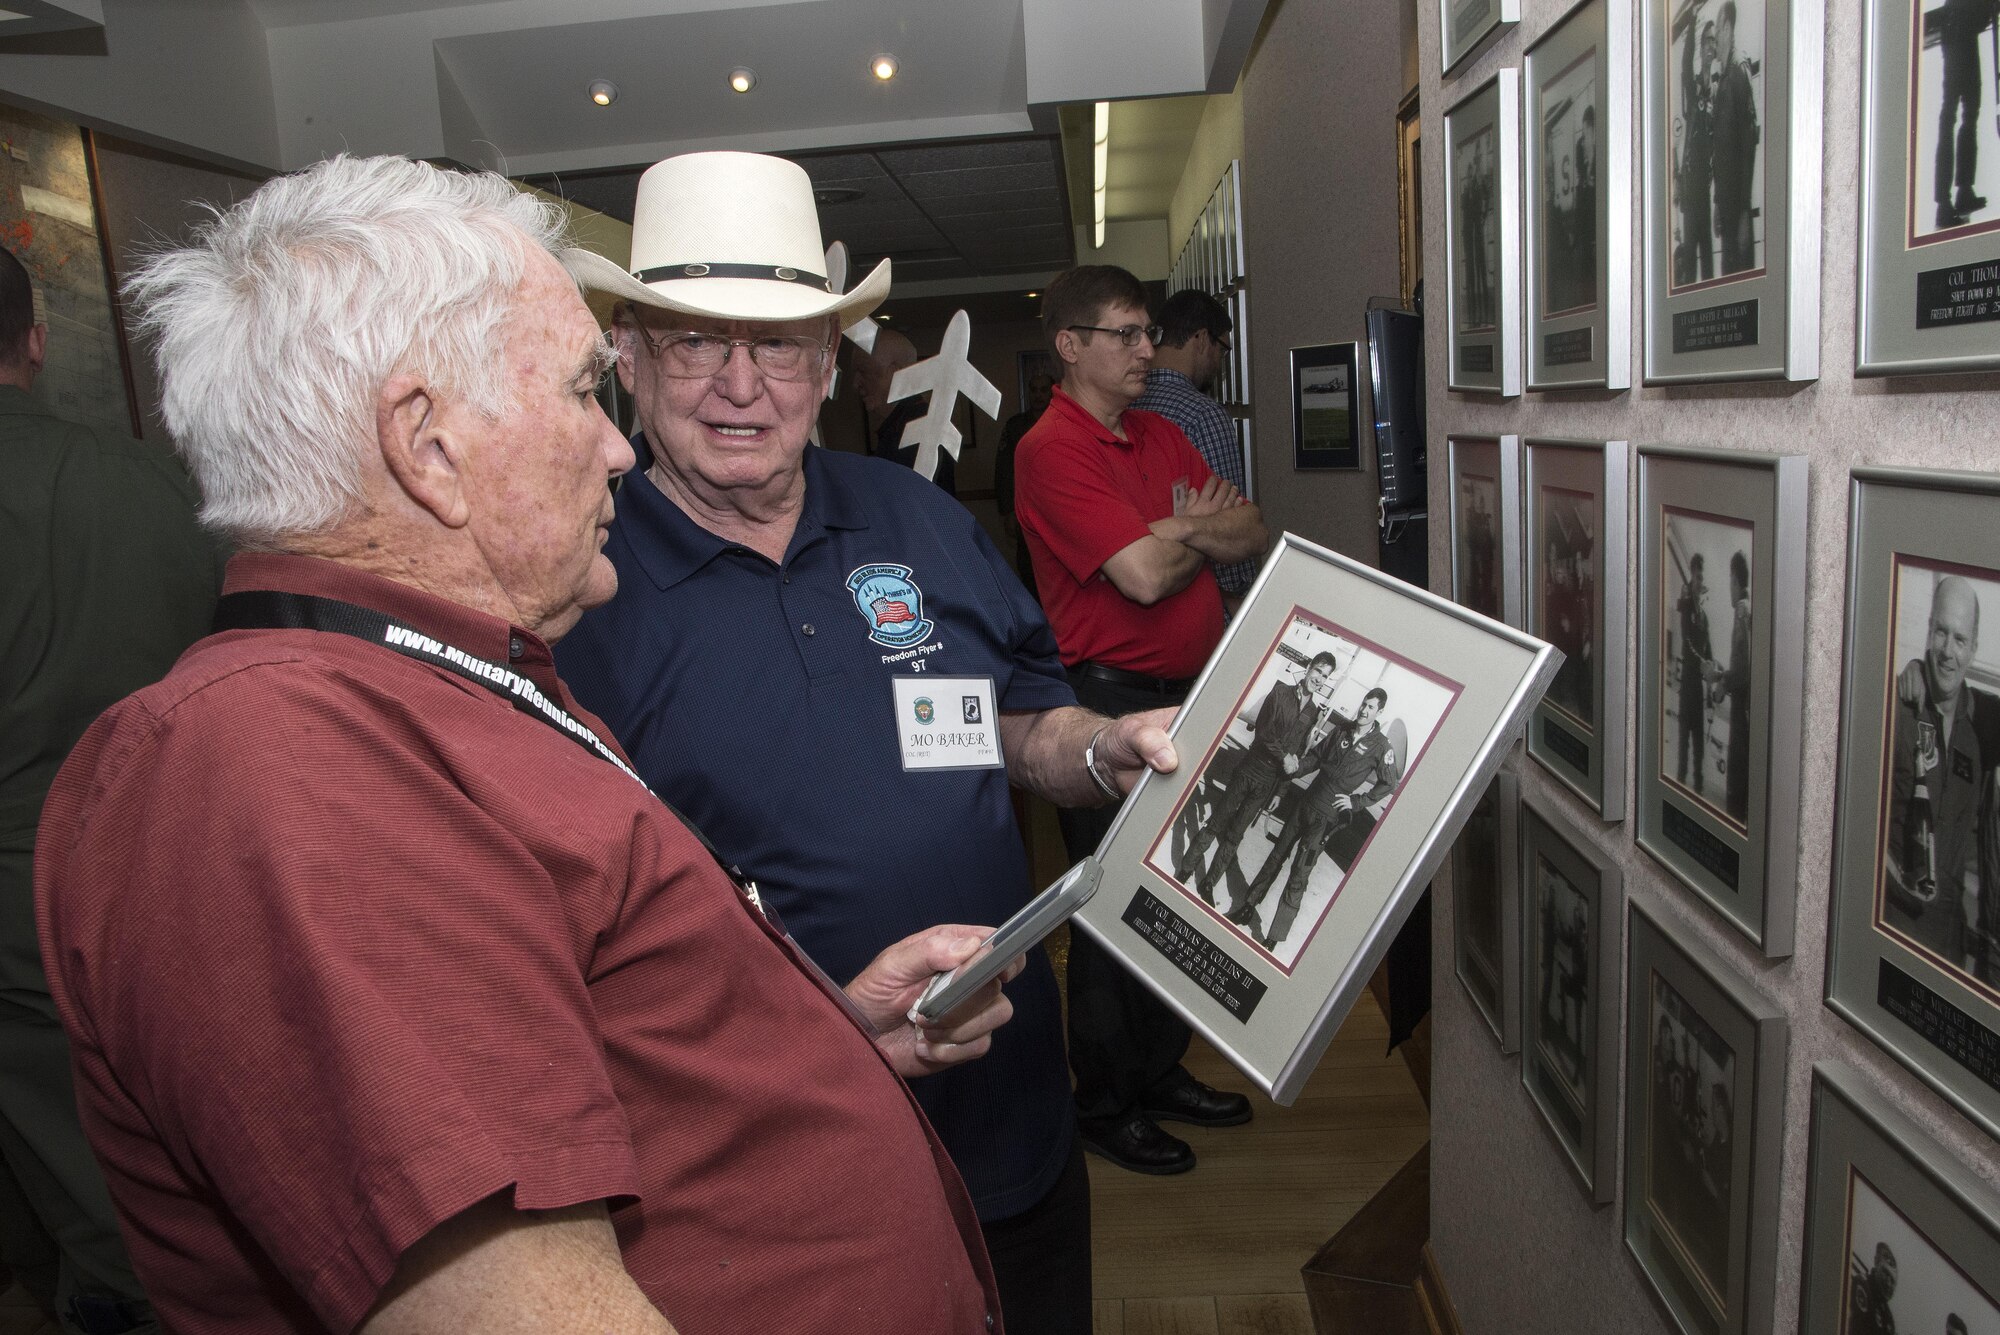 Retired Air Force Lt. Col. Thomas Collins (left), former Vietnam War POW, and retired Air Force Col. Elmo Baker, former Vietnam War POW, view Collins’ Freedom Flight photo during the 560th Flying Training Squadron Artifact Dedication ceremony and open house March 20 at Joint Base San Antonio-Randolph. The annual event, in conjunction with the 42nd Freedom Flyer Reunion and 18th Annual POW/MIA Symposium, honors all POWs held captive during the Vietnam War. The tradition began when members of the 560th Flying Training Squadron were given the task to retrain more than 150 POWs returning to flying status. Collins aircraft was shot down during a mission over North Vietnam Oct. 18, 1965, and was held captive by the North Vietnamese until his release Feb. 12, 1973. Baker’s aircraft was shot down during a mission over North Vietnam Aug. 23, 1967, and was held captive by the North Vietnamese until his release March 1973. (U.S. Air Force Photo by Johnny Saldivar)